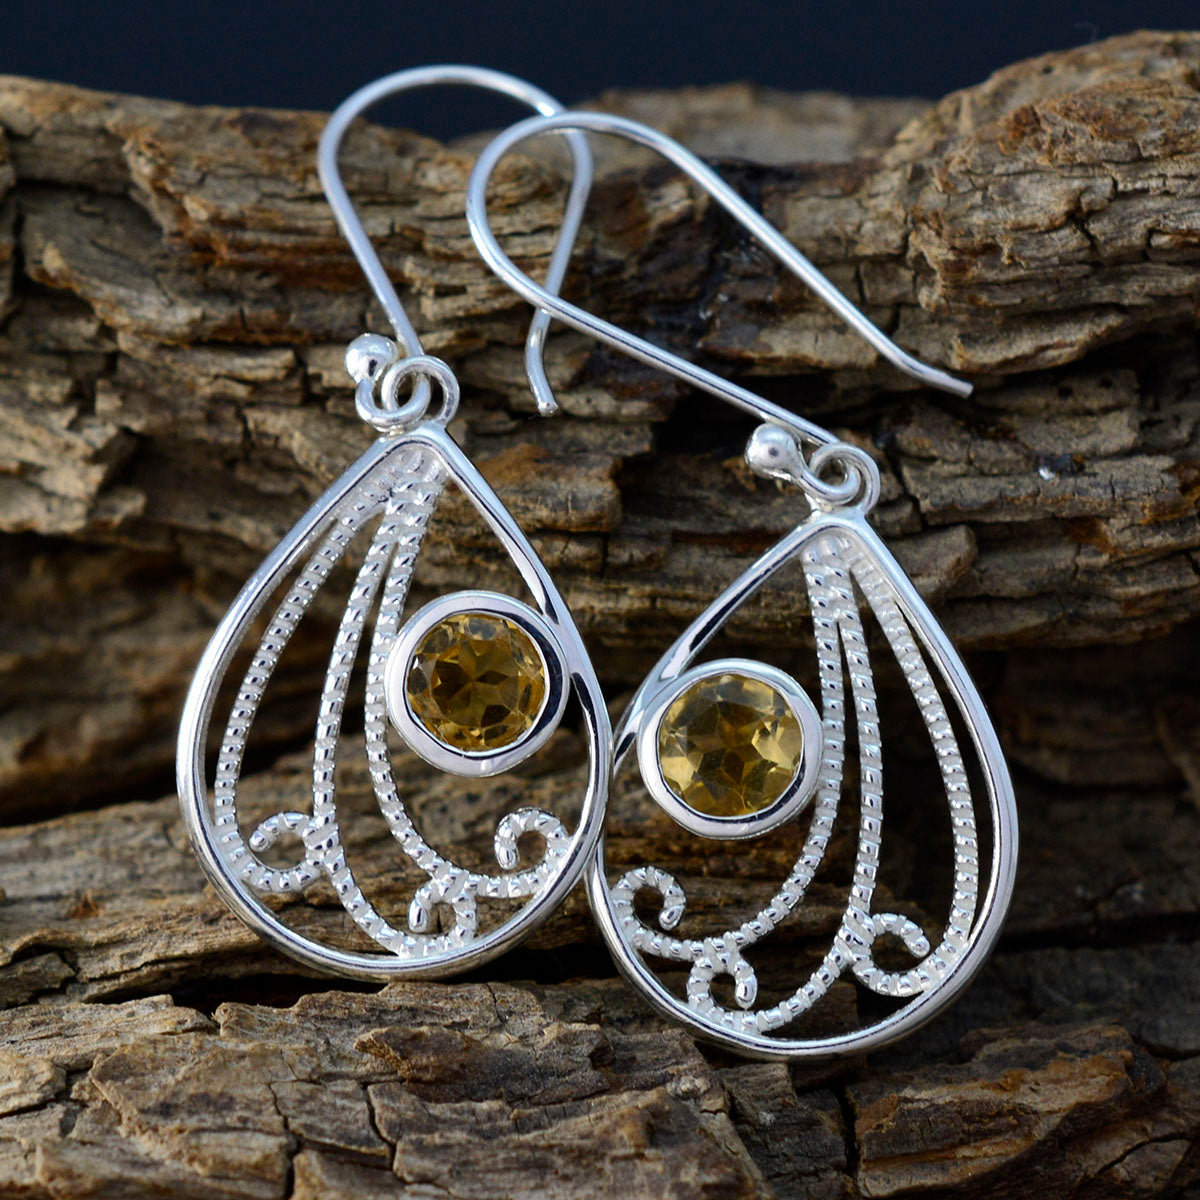 Riyo Real Gemstones round Faceted Yellow Citrine Silver Earrings gift for black Friday